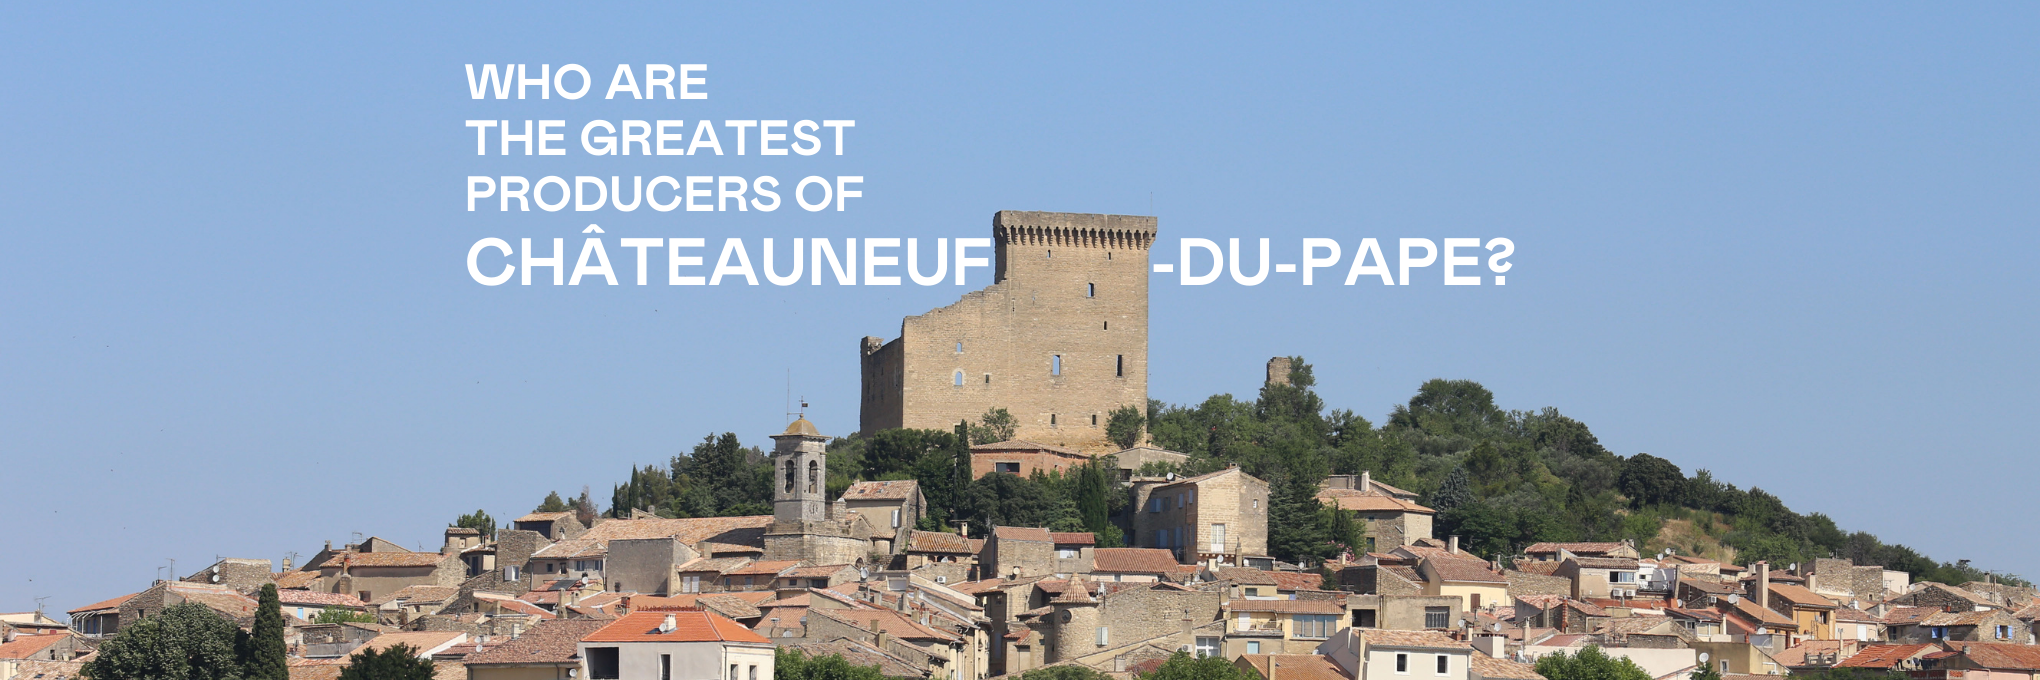 Who Are the Two Greatest Producers of Châteauneuf-du-Pape?